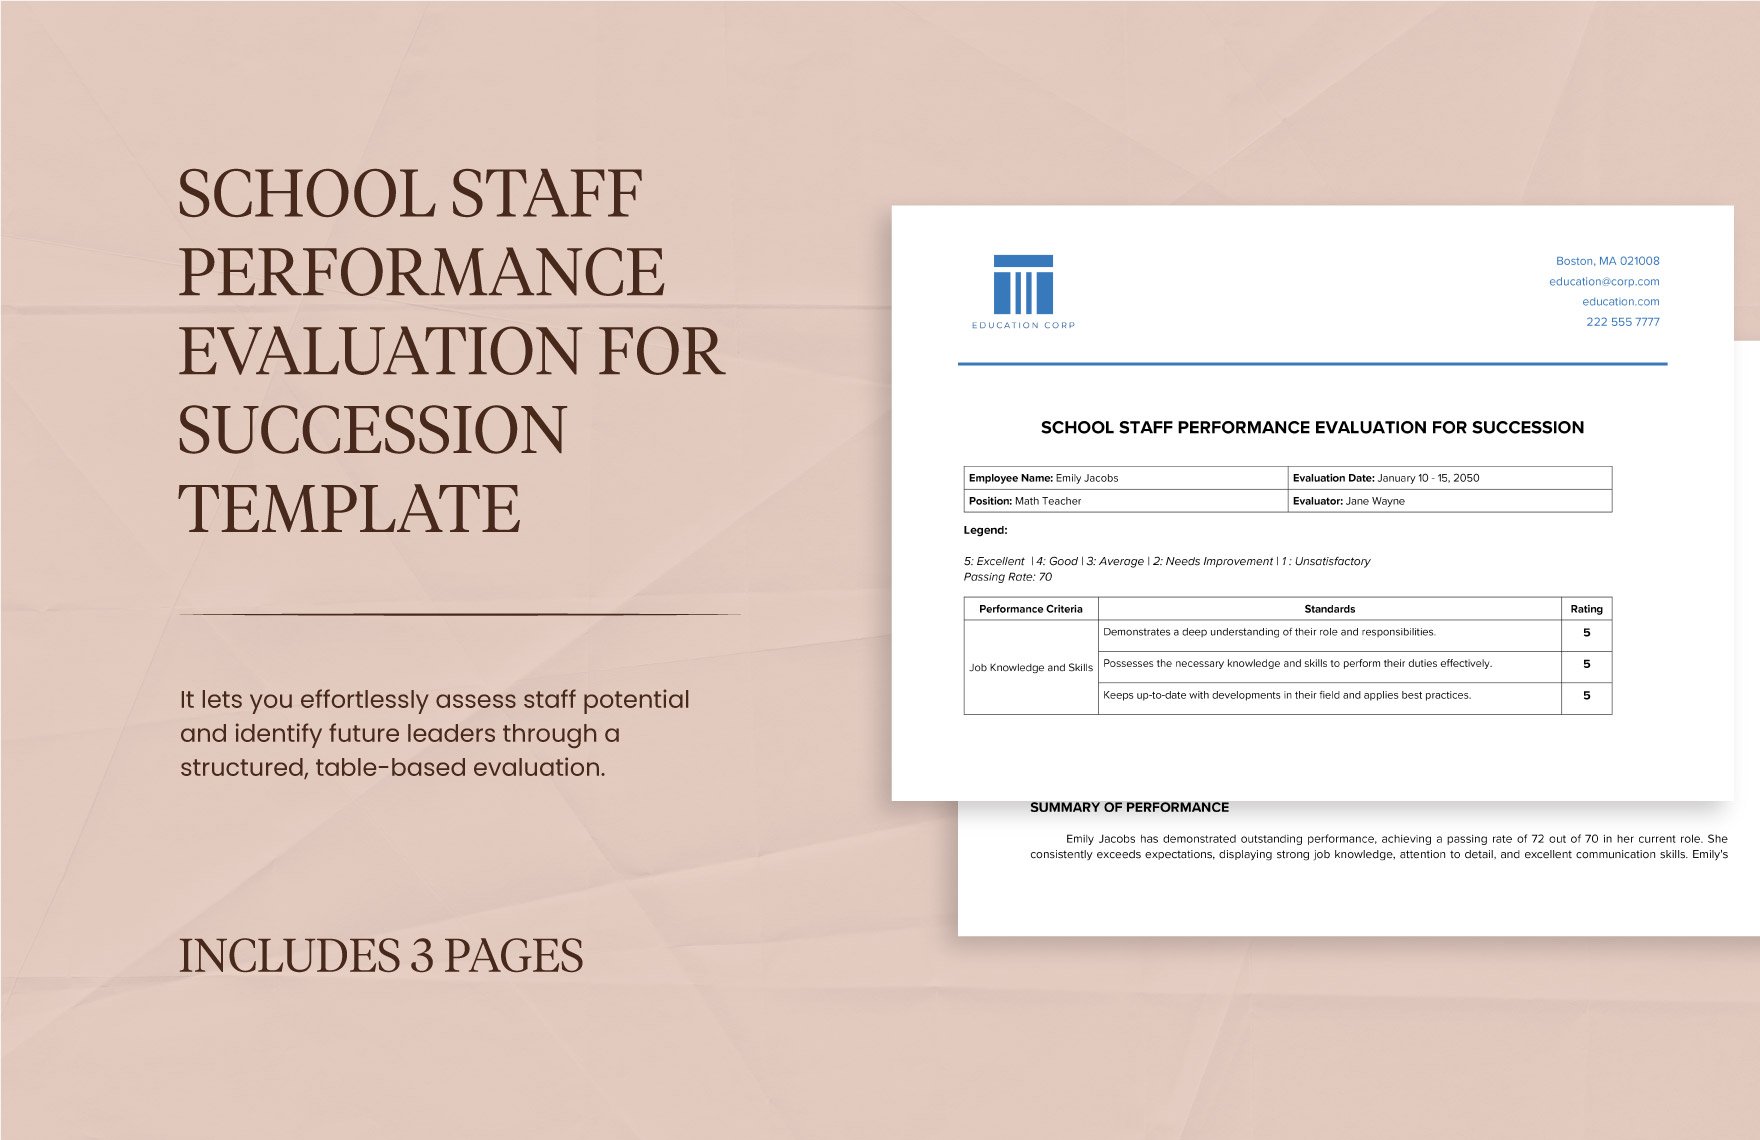 School Staff Performance Evaluation for Succession Template